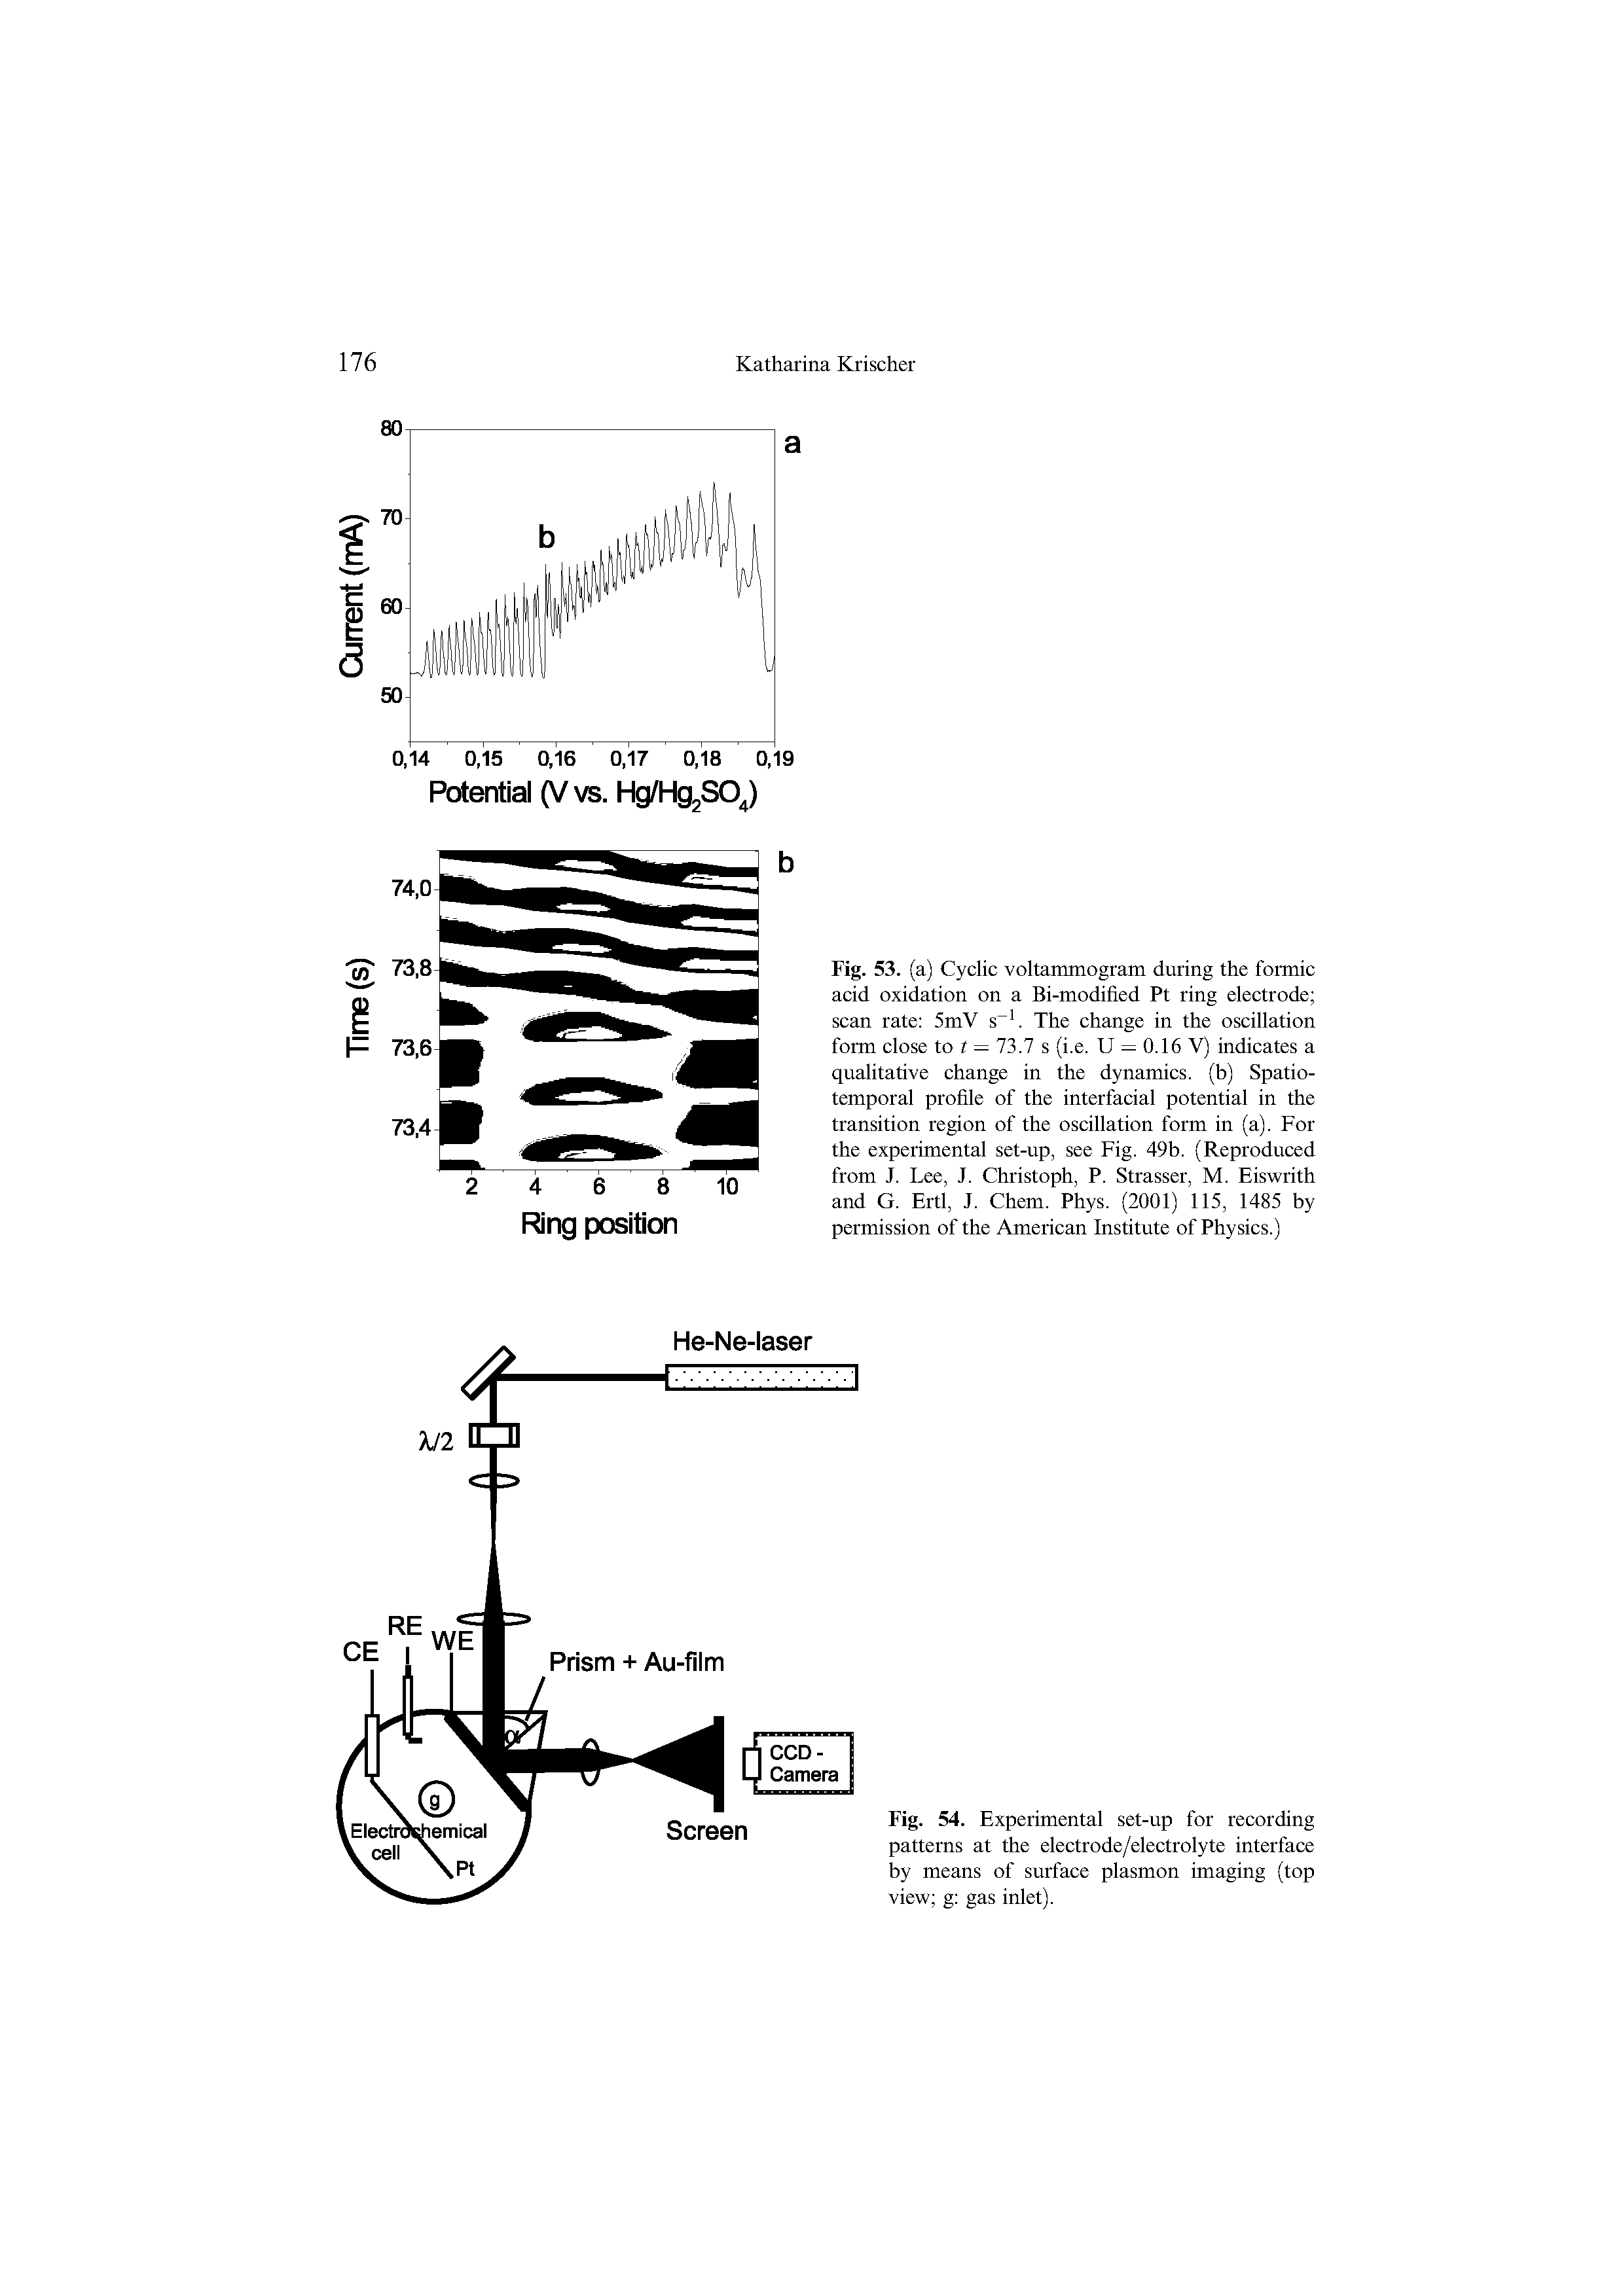 Fig. 54. Experimental set-up for recording patterns at the electrode/electrolyte interface by means of surface plasmon imaging (top view g gas inlet).